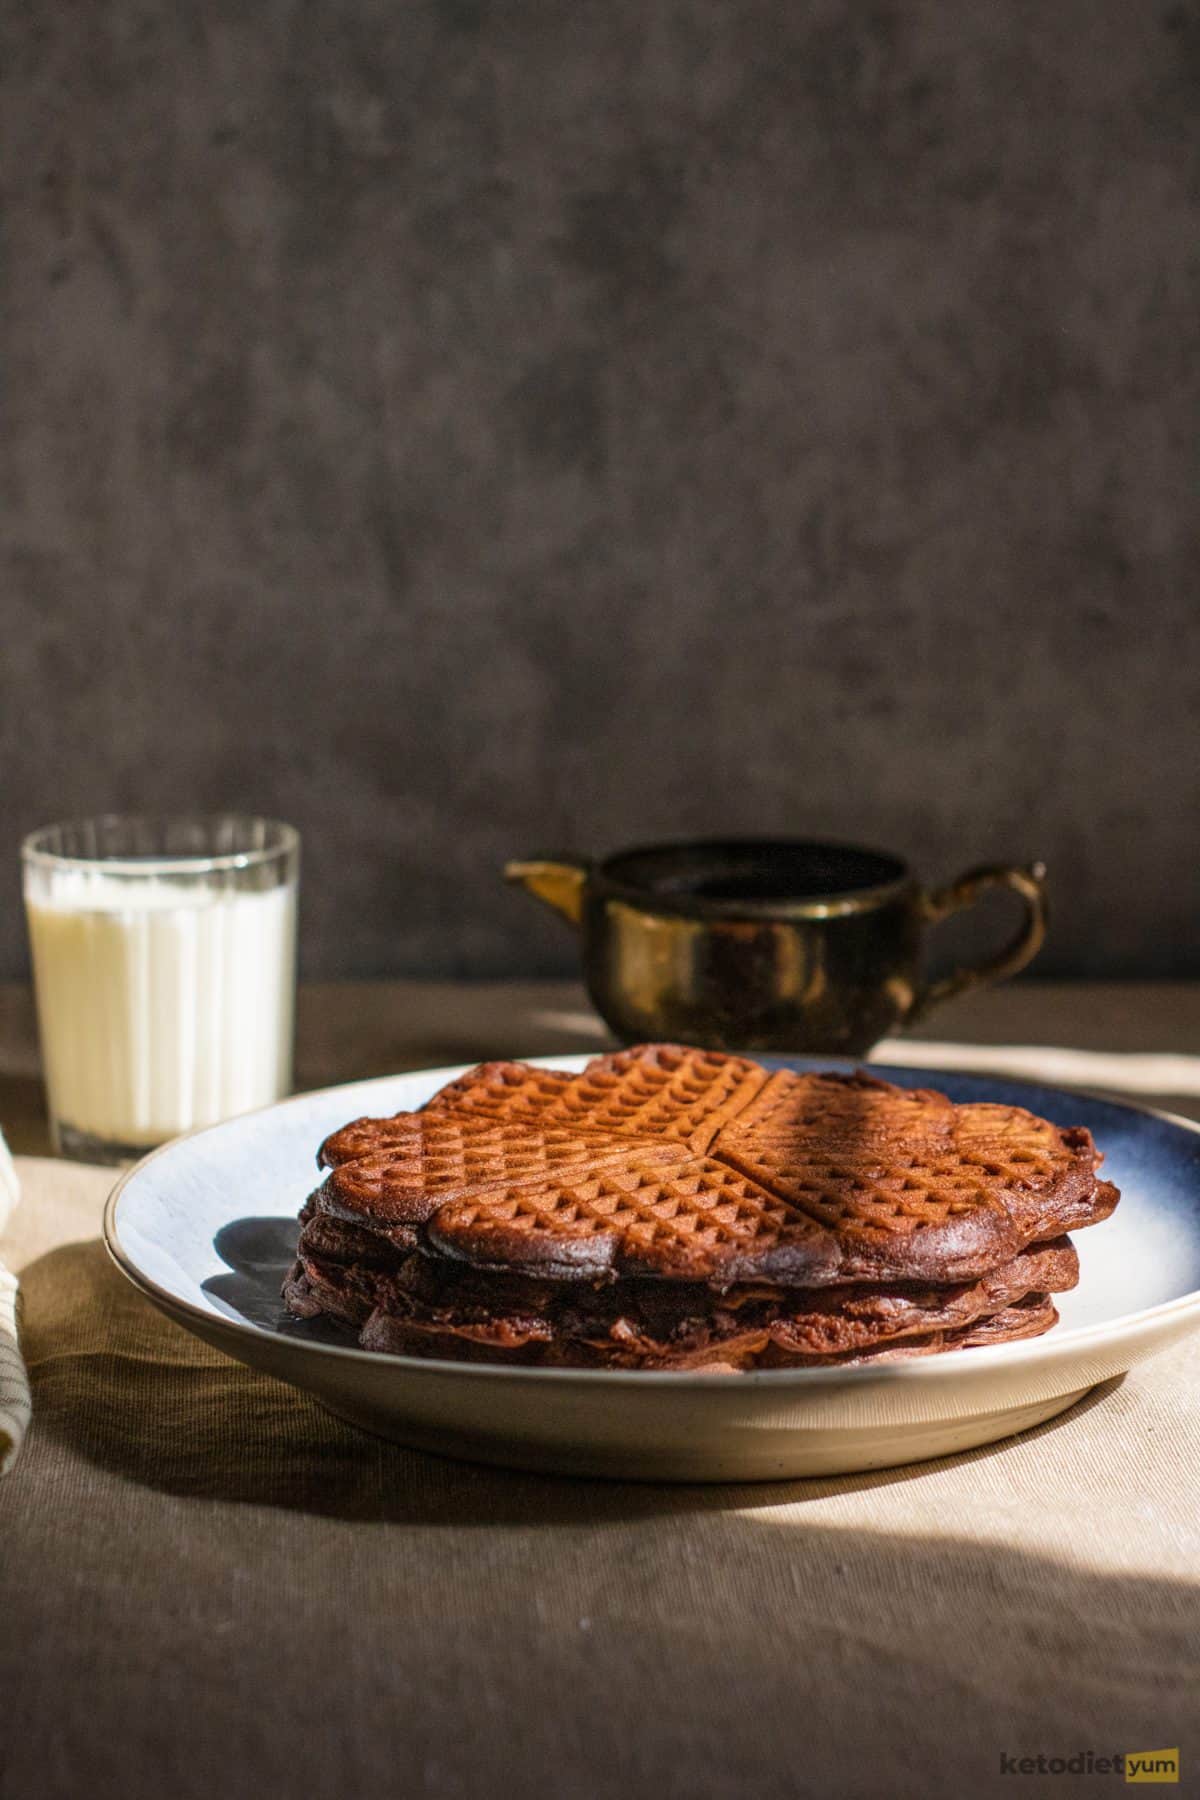 A stack of plain chocolate chaffles that are super low in carbs